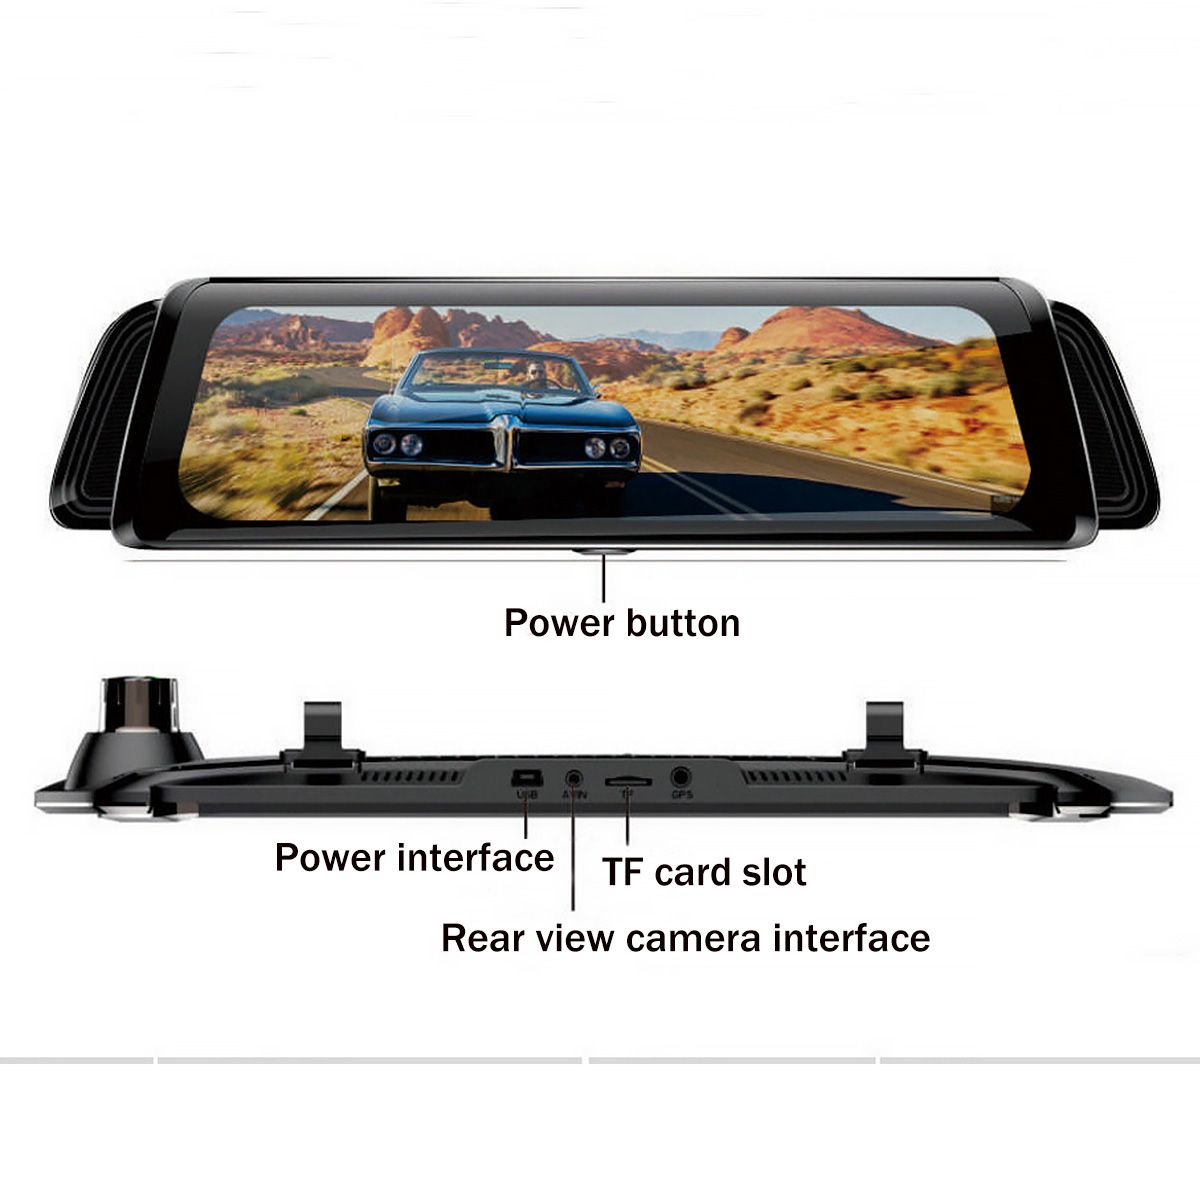 10-inch-Touch-Auto-Loop-Recording-Car-DVR-Parking-Monitor-Camera-1570111